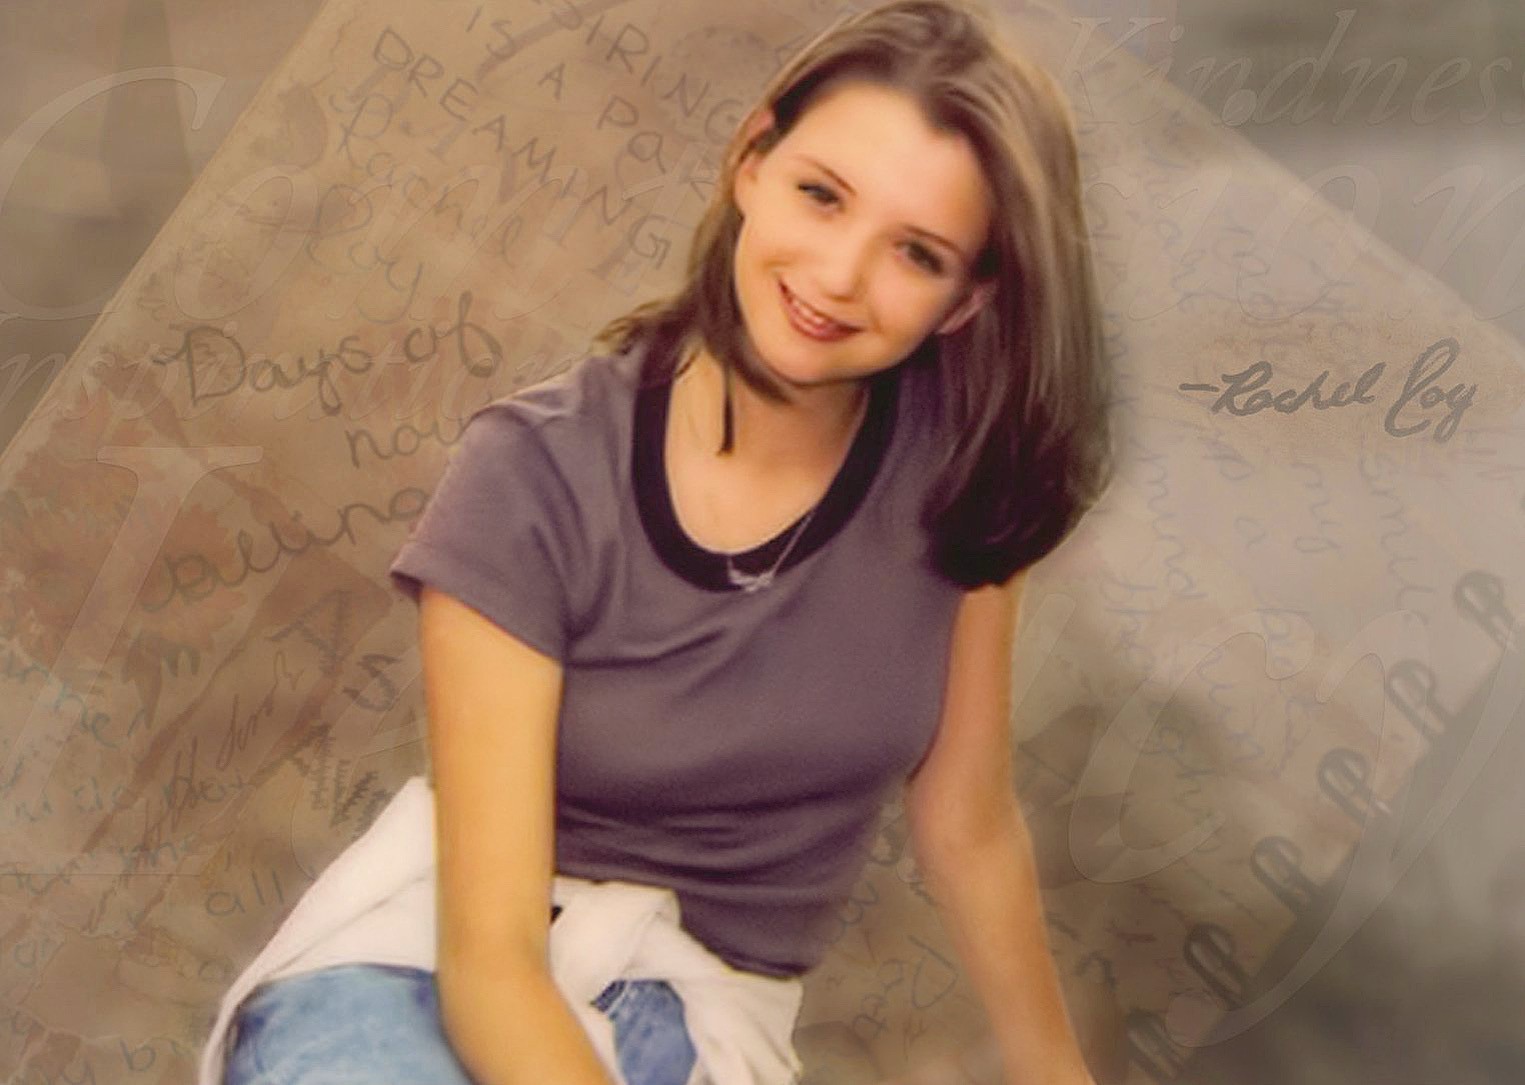 Rachel Scott was the first student murdered at Columbine High School in Littleton, Colorado, on April 20, 1999.